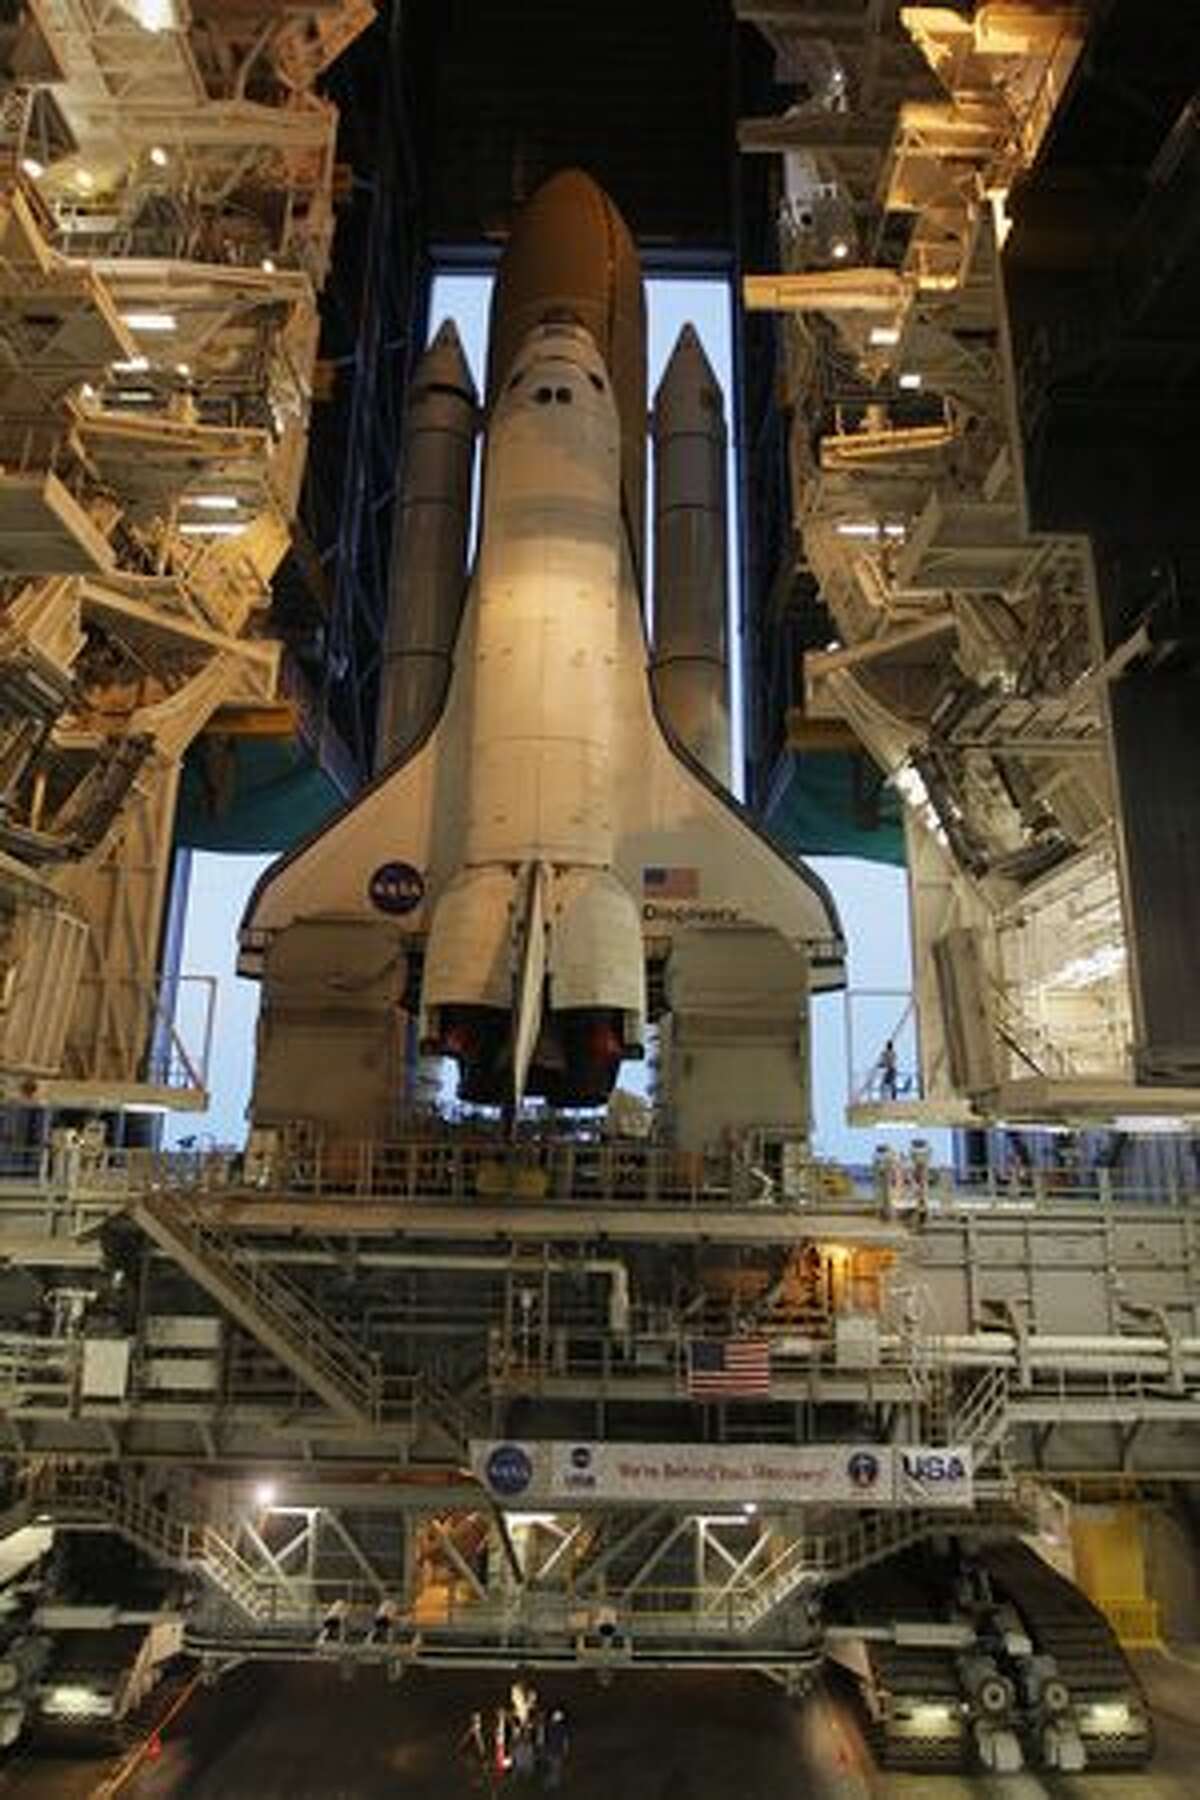 Space shuttle Discovery rolls out of NASA's vehicle assembly building atop a crawler transporter to launch pad 39 A at Kennedy Space Center in Cape Canaveral, Fla.